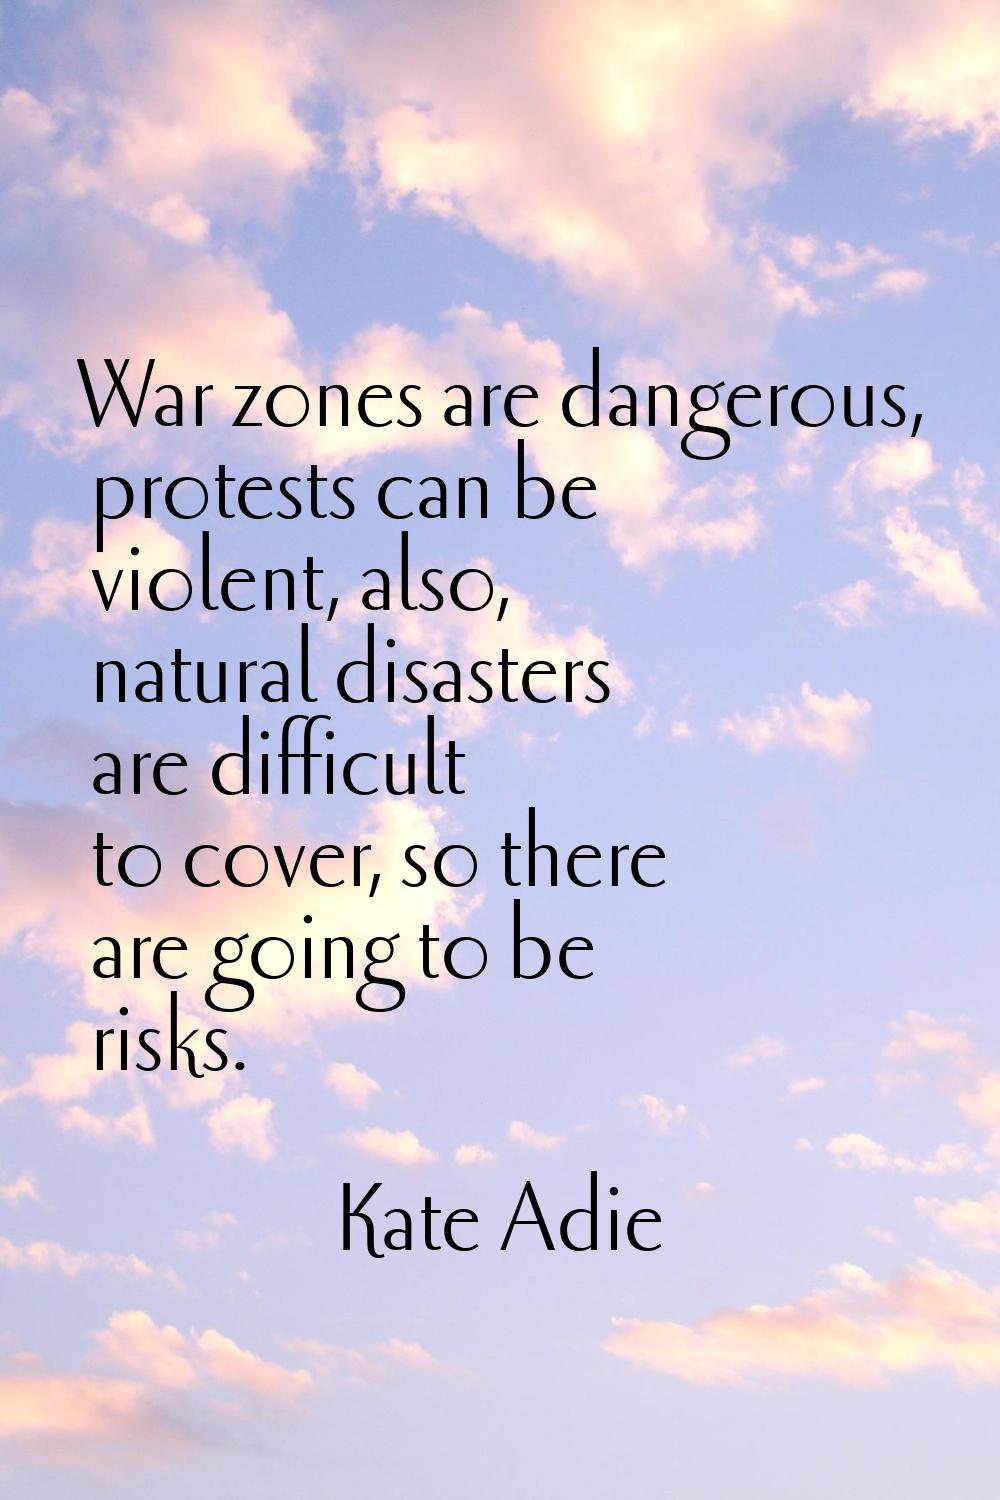 War zones are dangerous, protests can be violent, also, natural disasters are difficult to cover, s